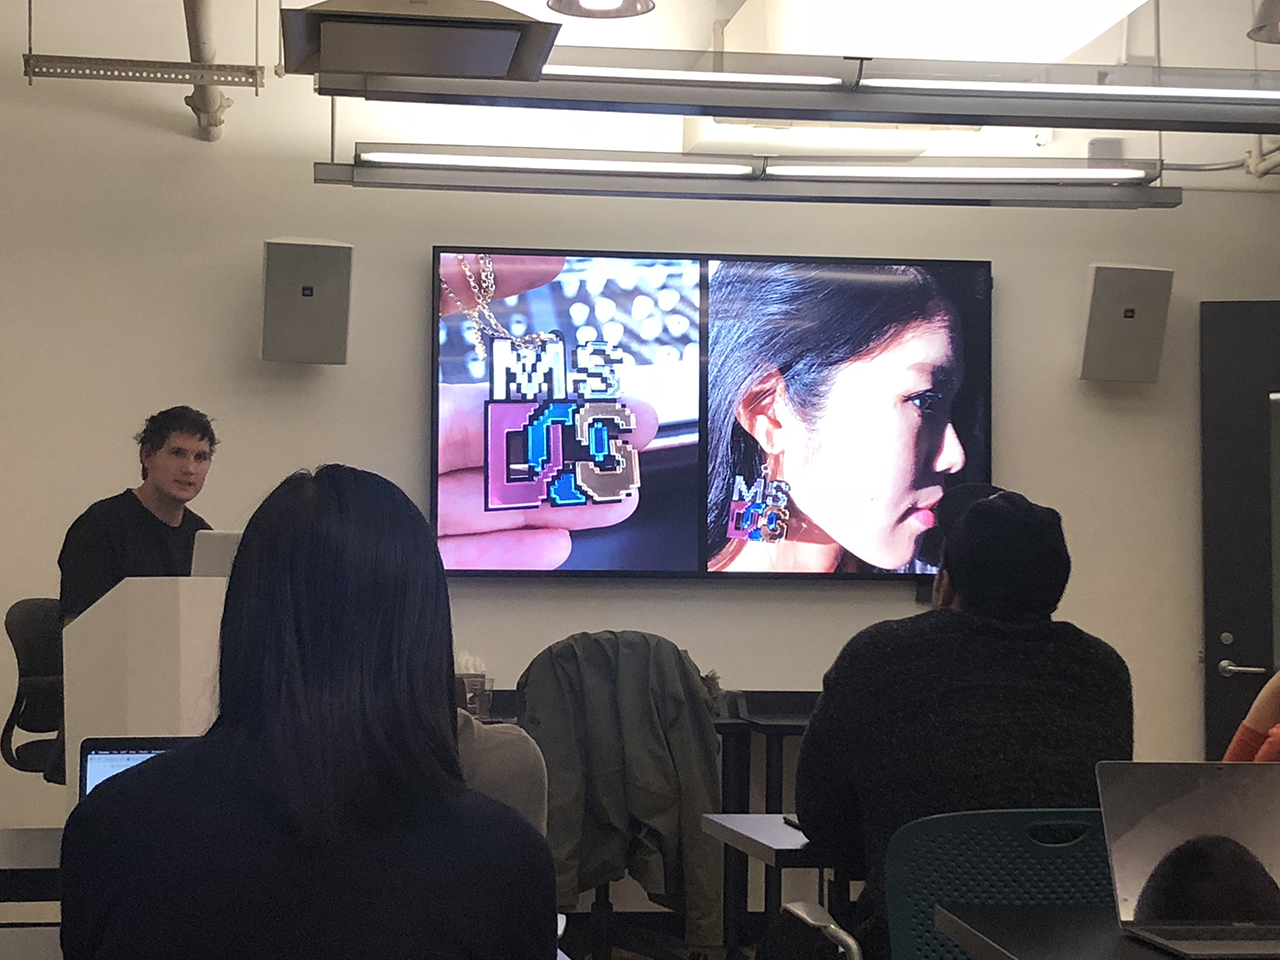 A photo of some students in a classroom, listening to a lecture presented by a man, while watching a tv screen. On the screen there is a photo of a woman wearing some earrings in the form of the MSDOS logo.